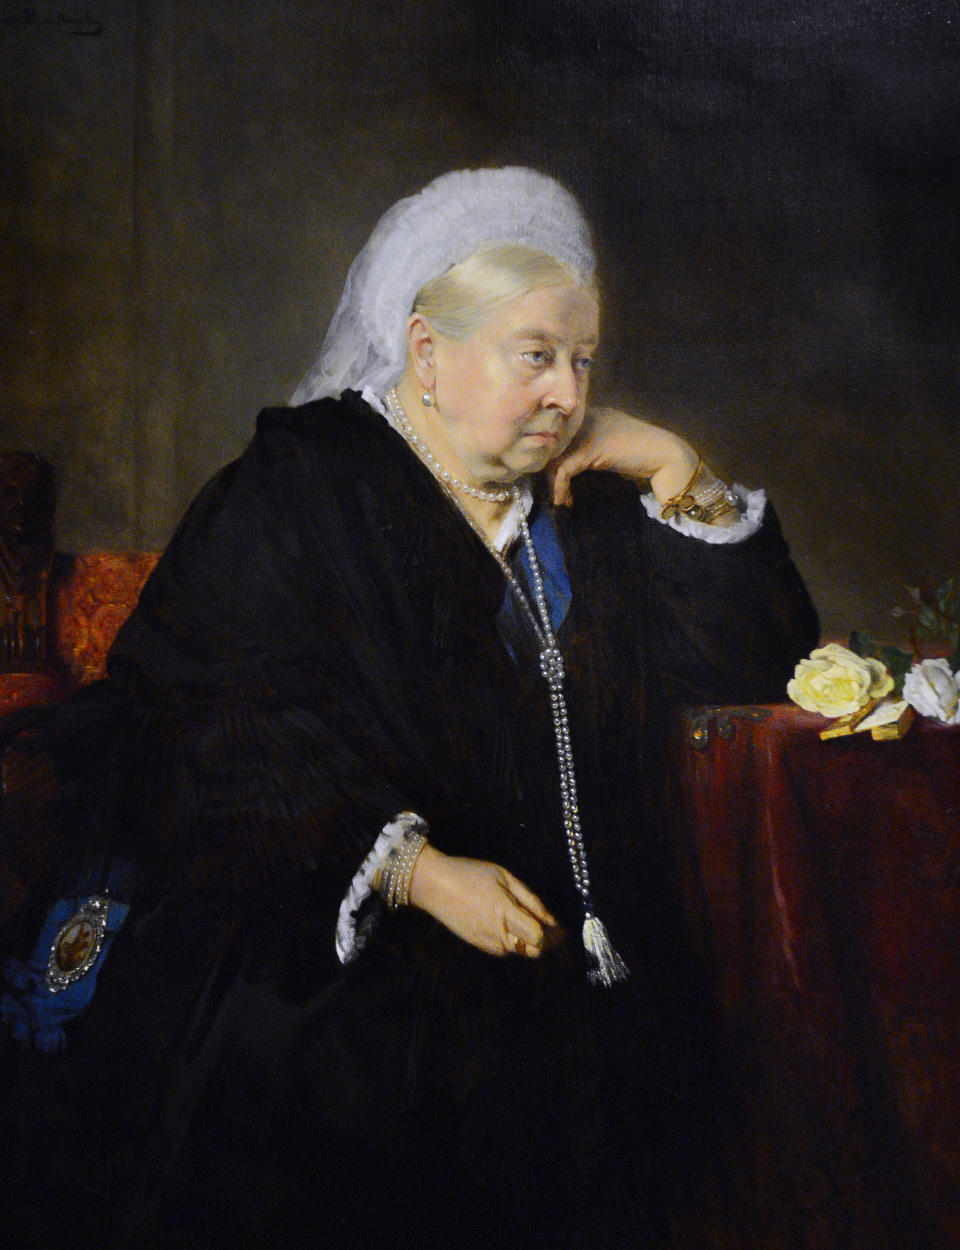 A portrait of England's Queen Victoria (1819-1901) painted in 1900 by Bertha Muller is on display at the National Portrait Gallery in London, England. The painting shows the queen nearing the end of her long reign and she wears the blue sash of the Order of the Garter. (Photo by Robert Alexander/Getty Images)